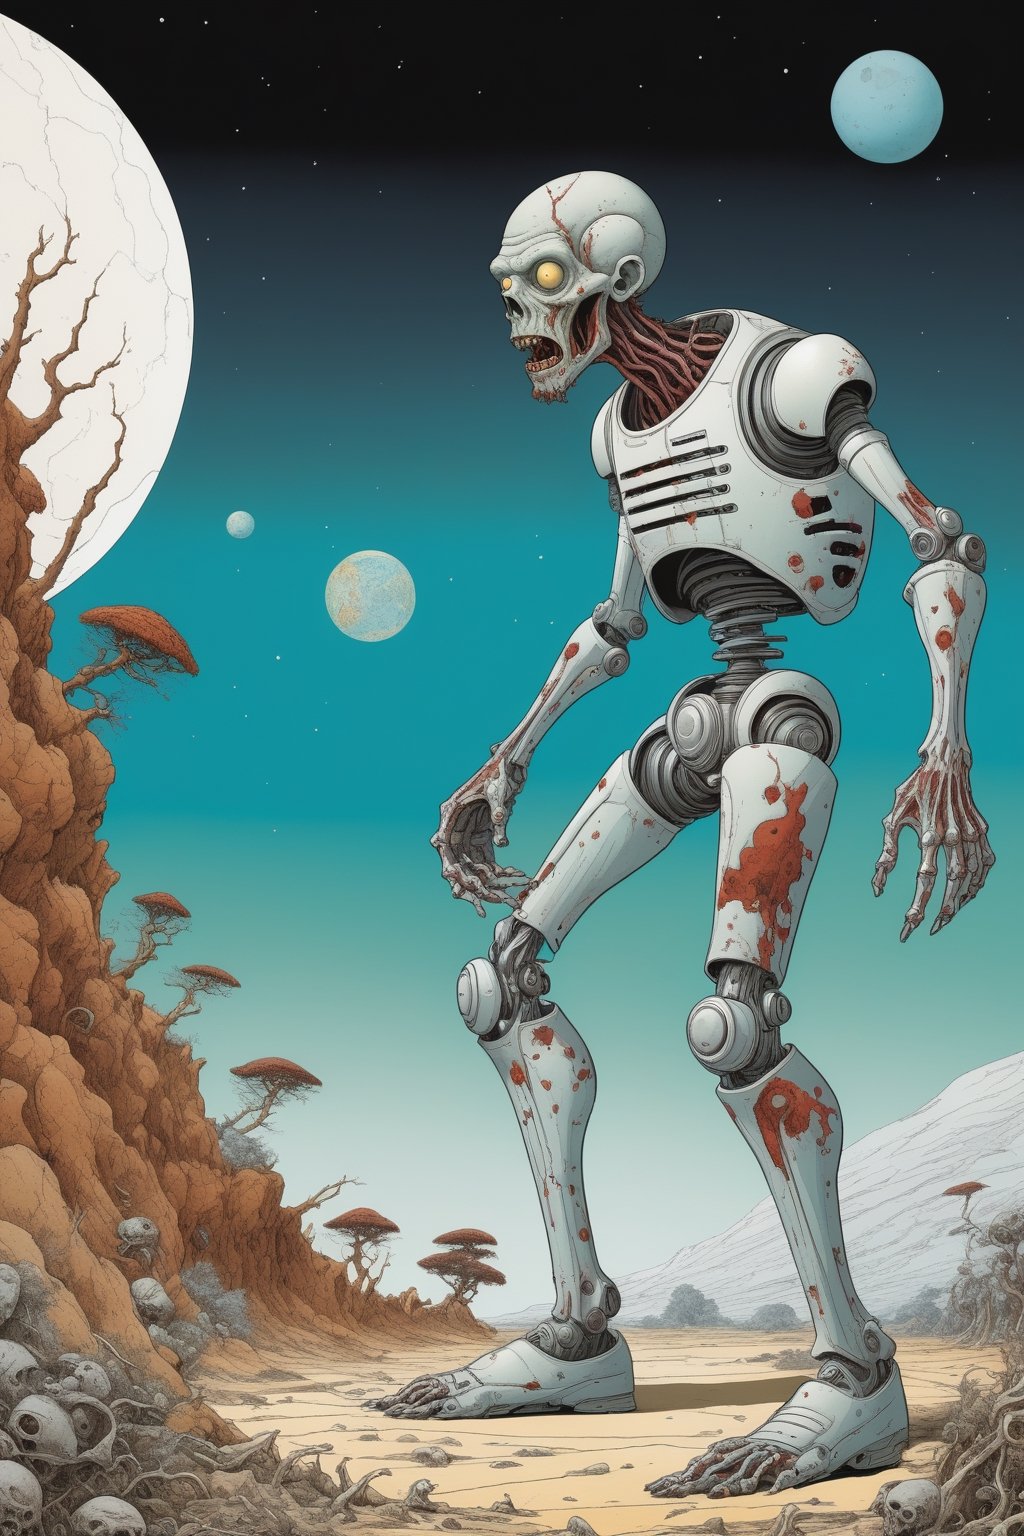 A humorous sci-fi poster featuring a cartoon zombie cyborg in vector art style with Cedar brown and white color palette. The zombie cyborg comically hits a wall breaking its head. In the background, a fantastical planet teeming with diverse creatures is portrayed in a watercolor texture. Artists inspiring this piece could be the imaginative worlds of Jean Giraud (Moebius) and the colorful whimsy of Yuko Shimizu. 8K resolution for exceptional detail. Trending on artstation.